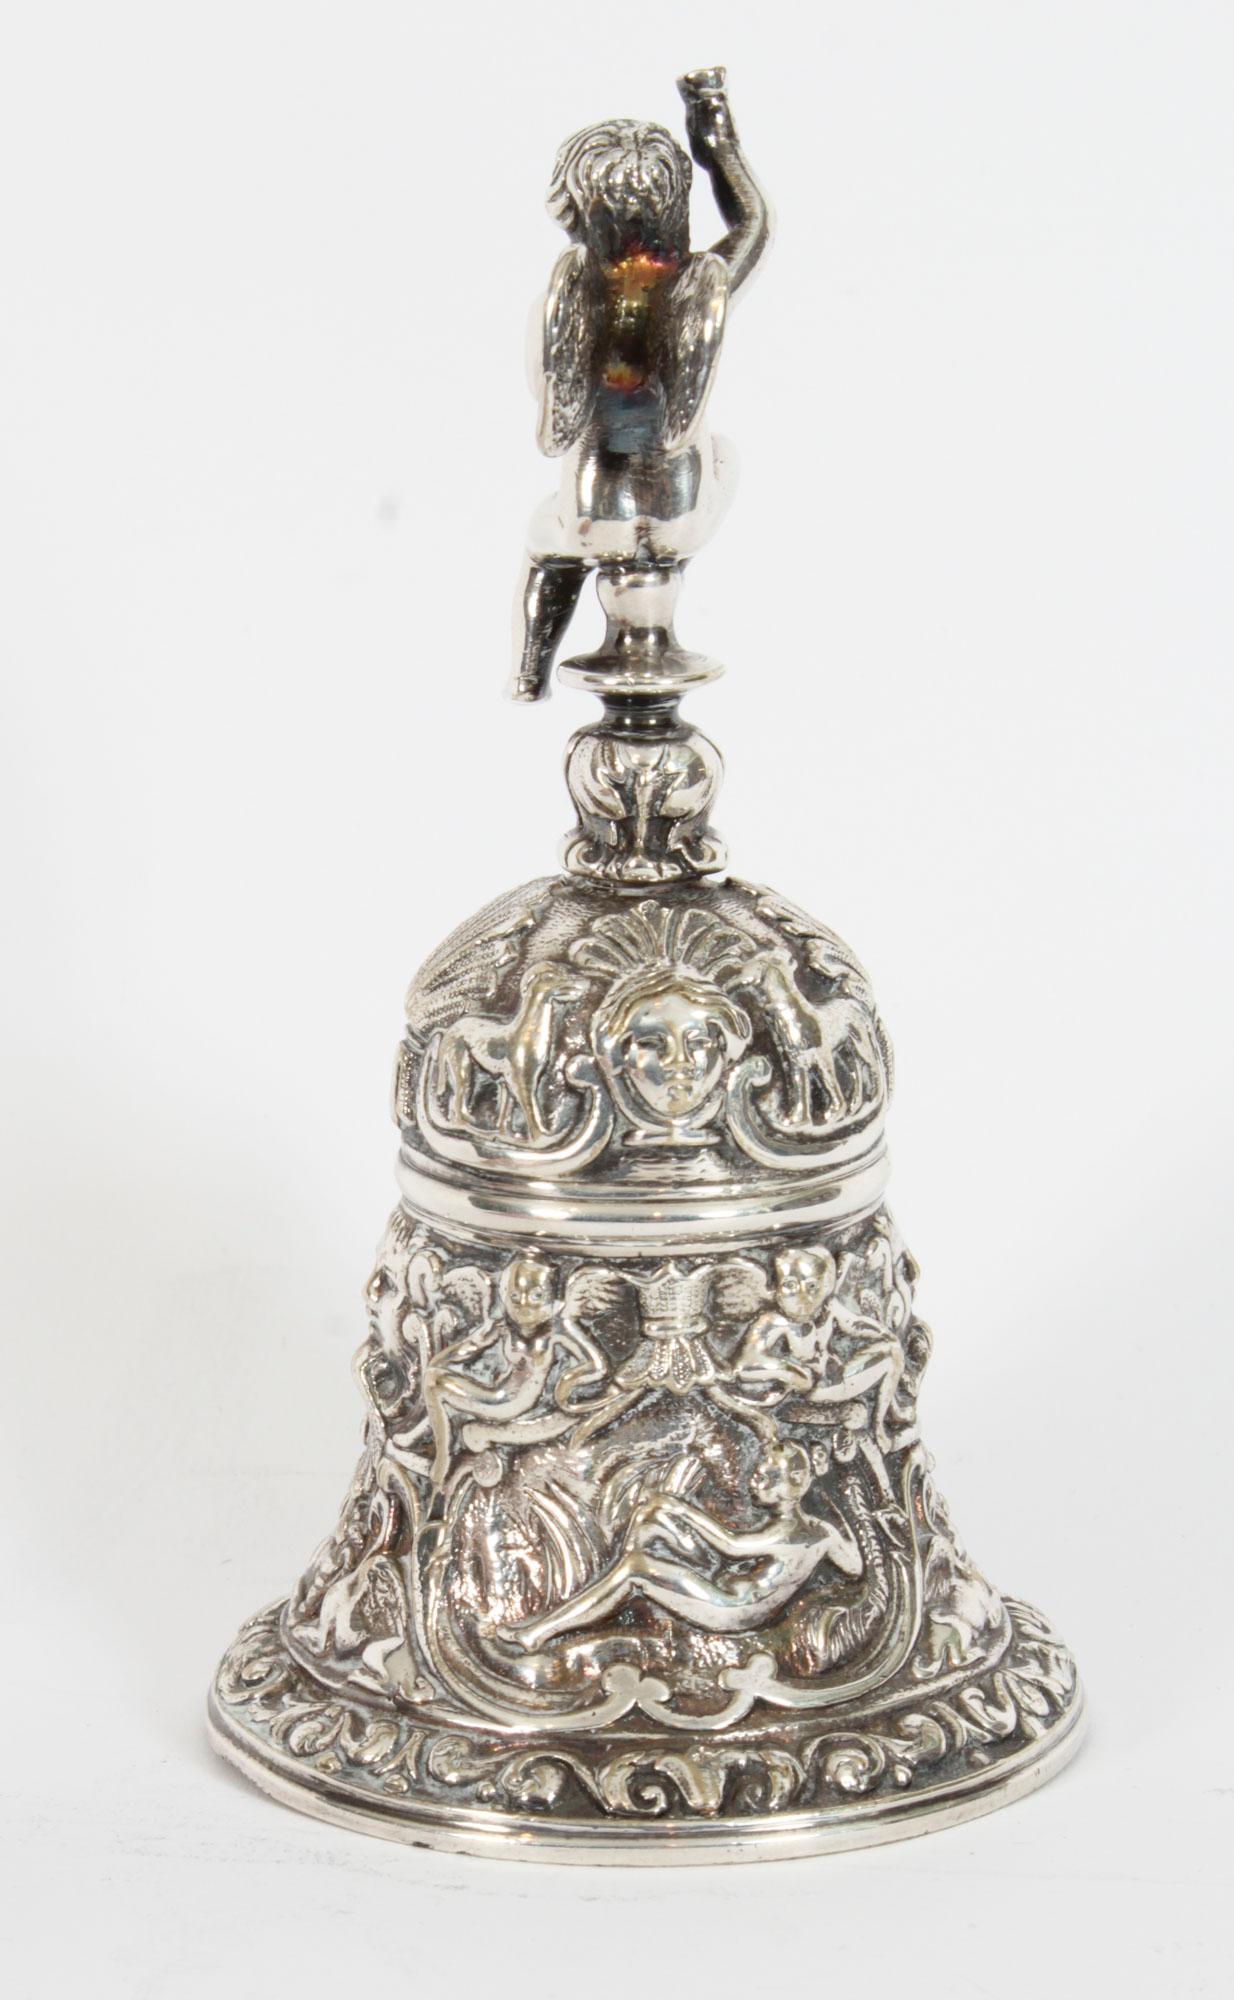 Antique Silver Plated Hand Bell Renaissance Revival 19th Century 7